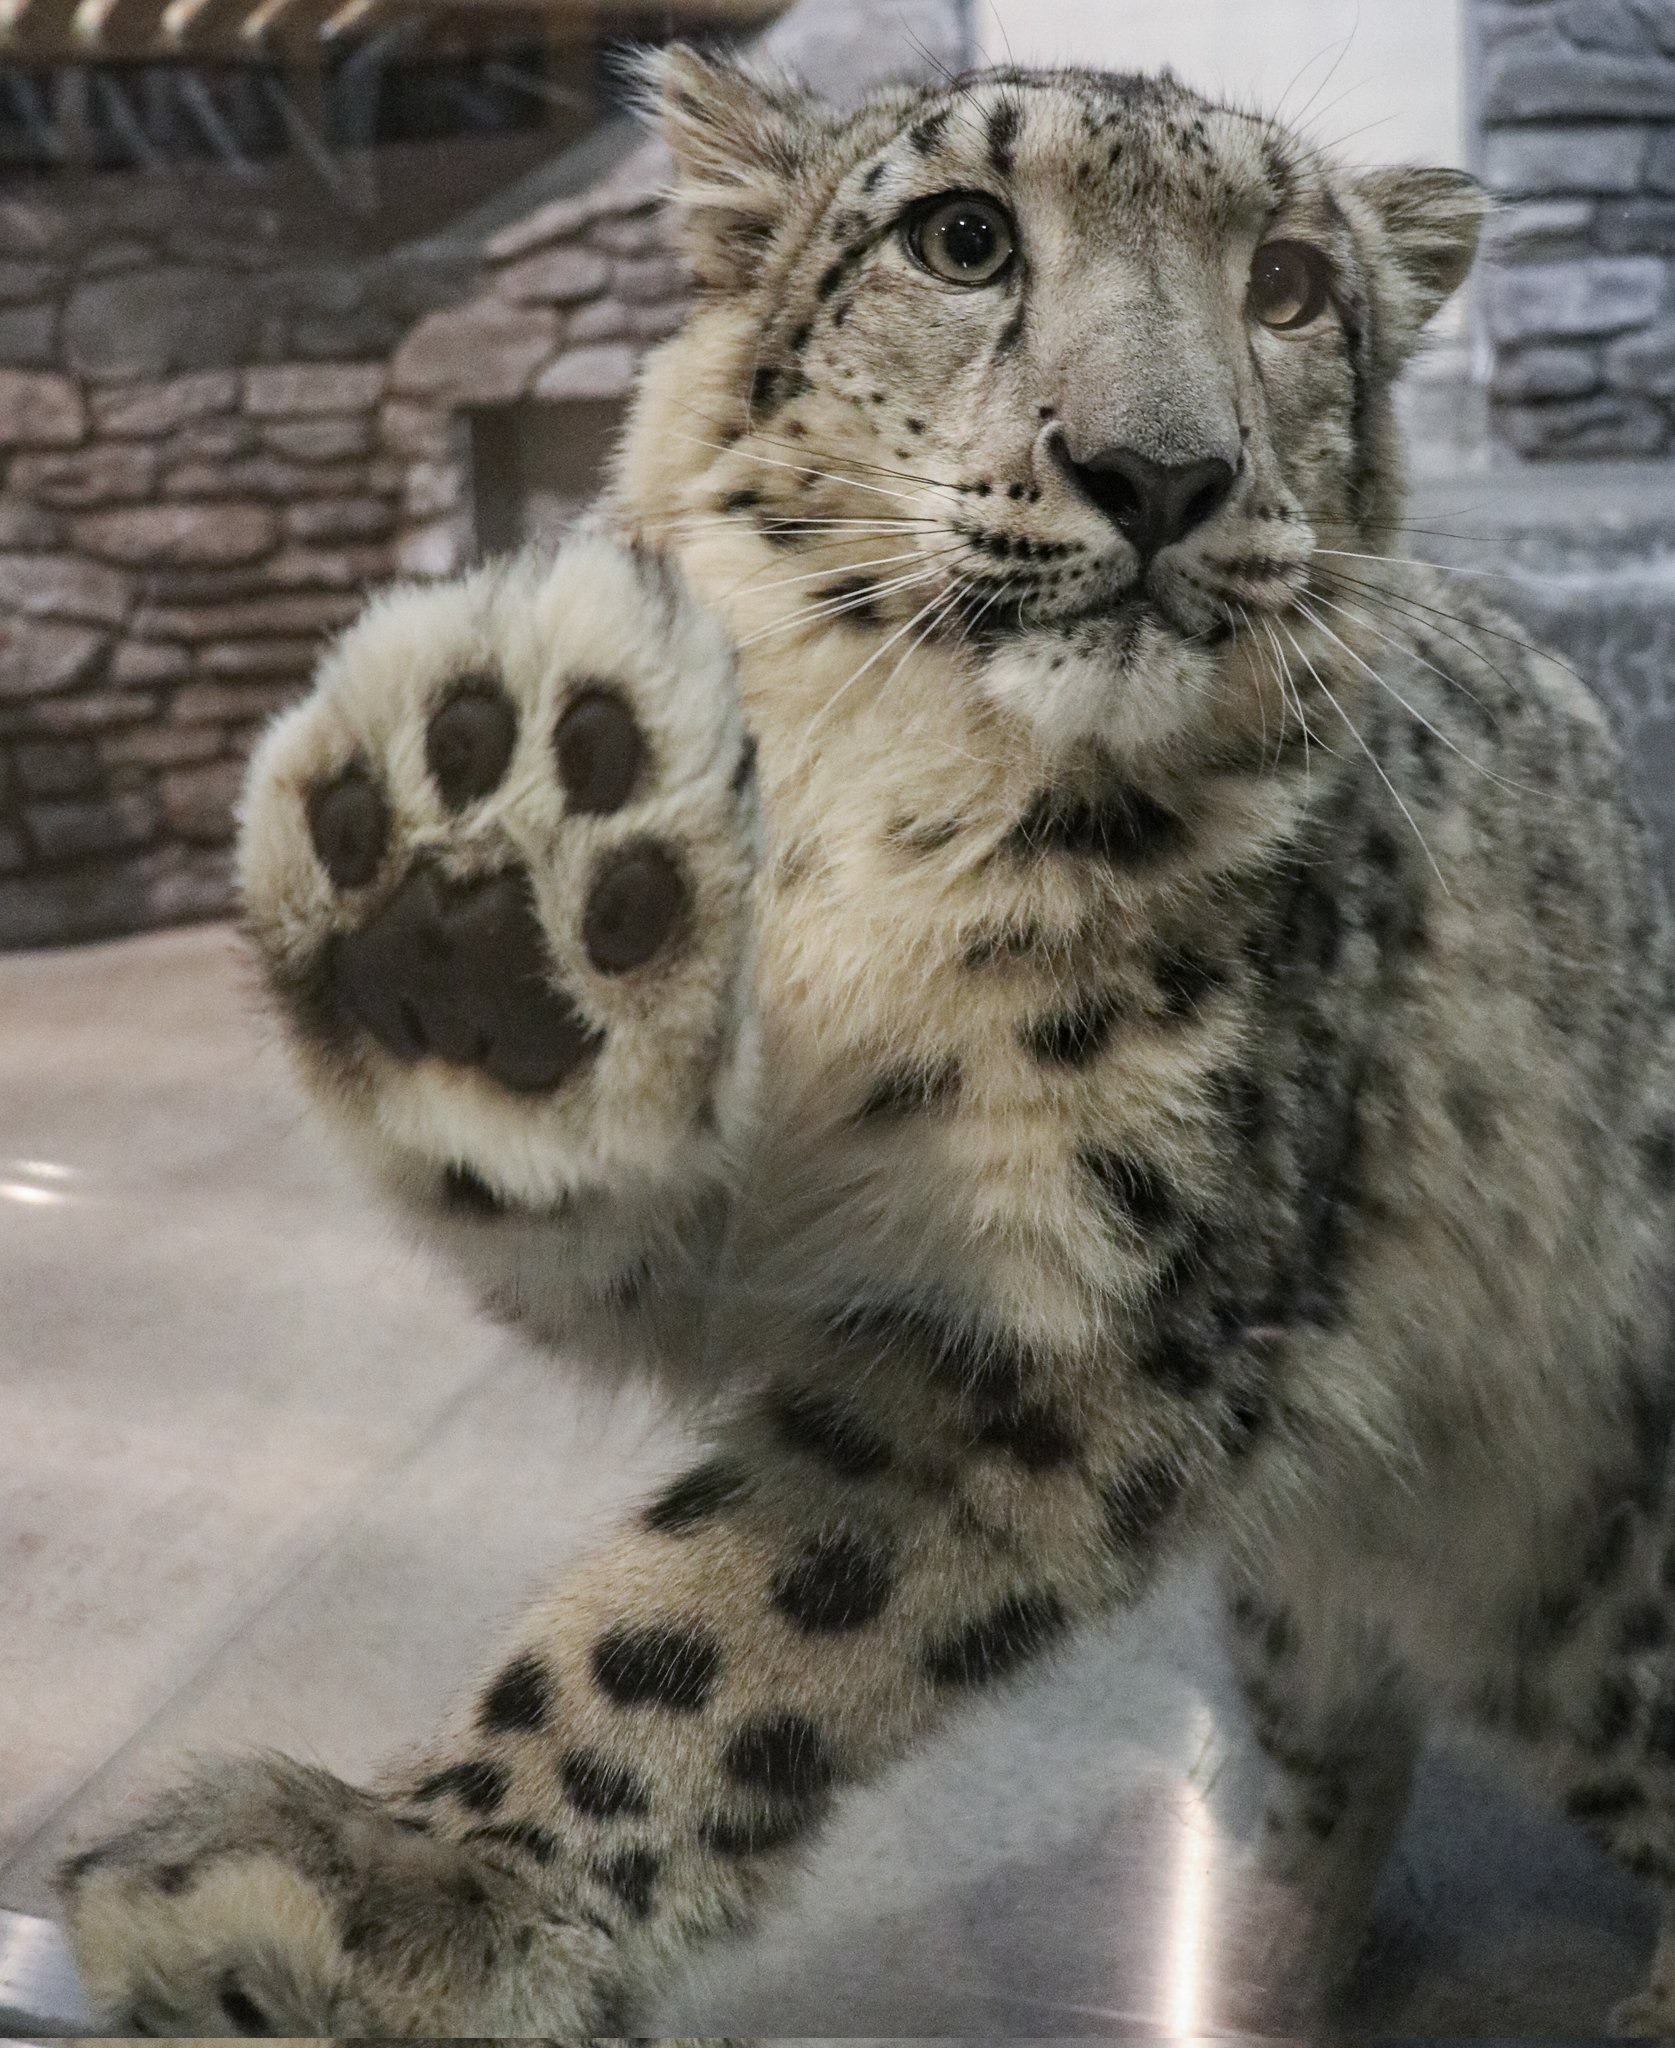 A friendly snow leopard holding its paw up to glass, looking like it is waving